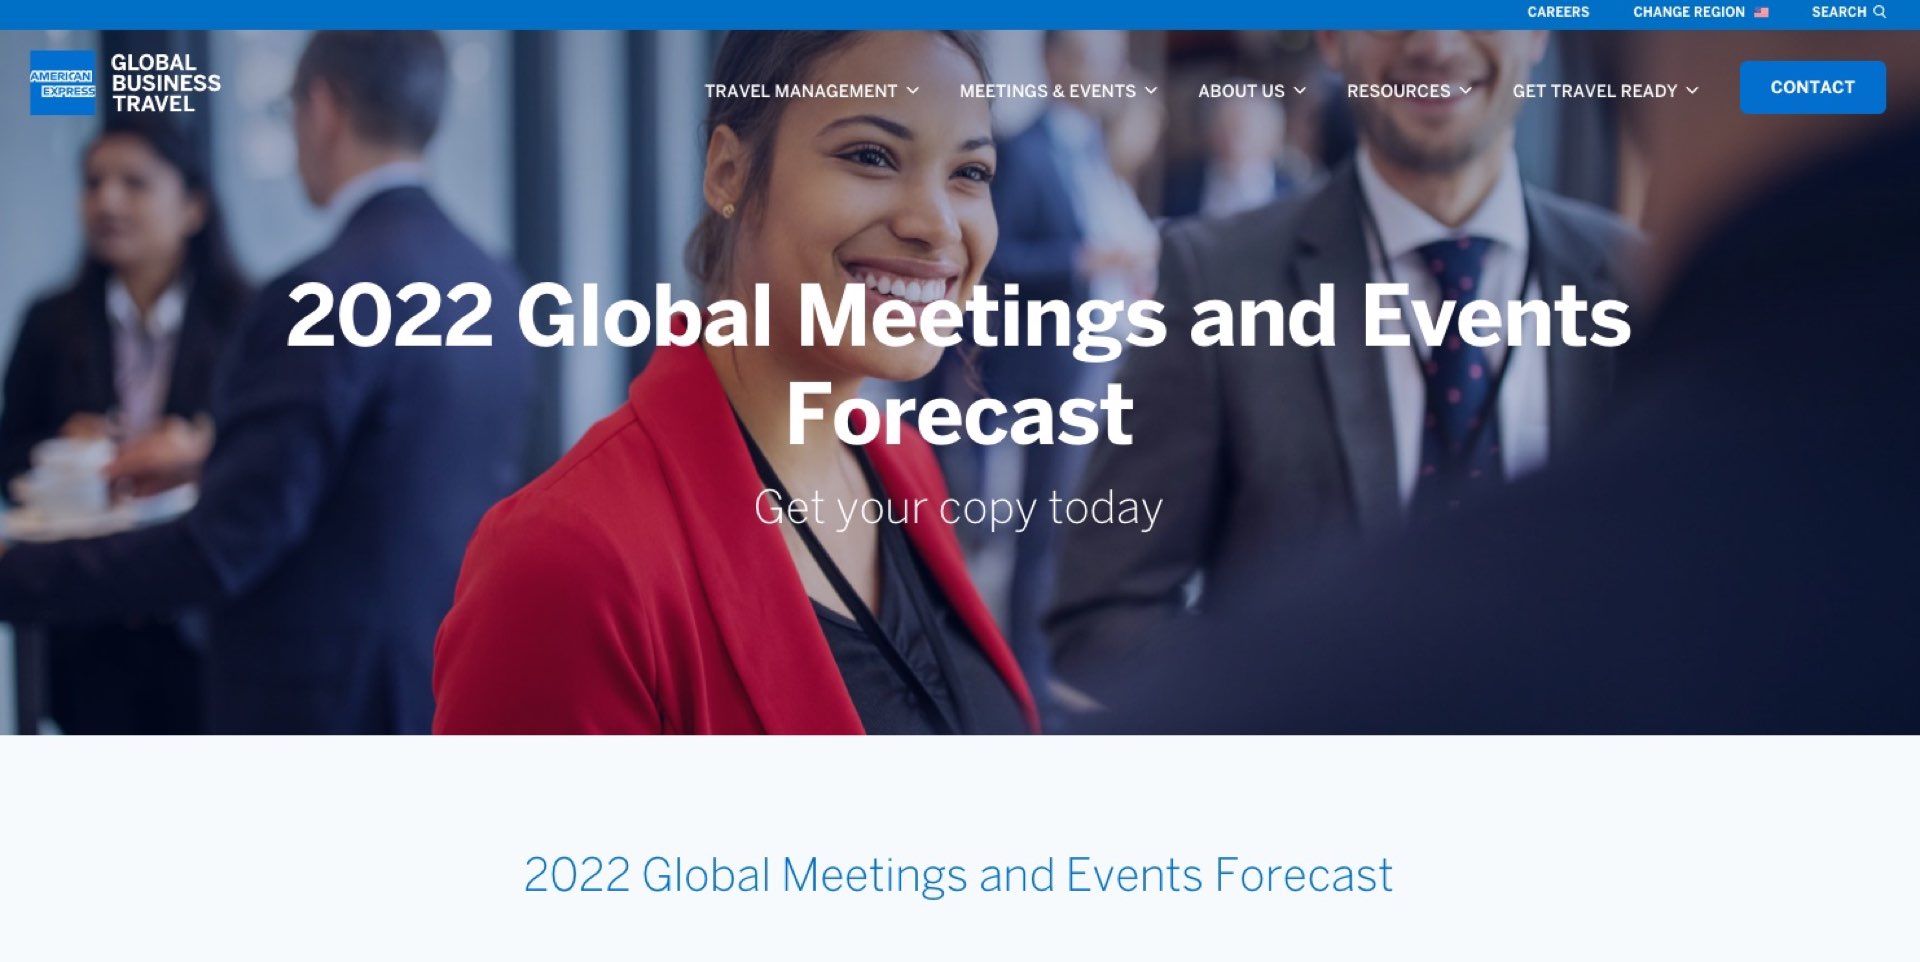 Amex Global Meetings & Events Forecast